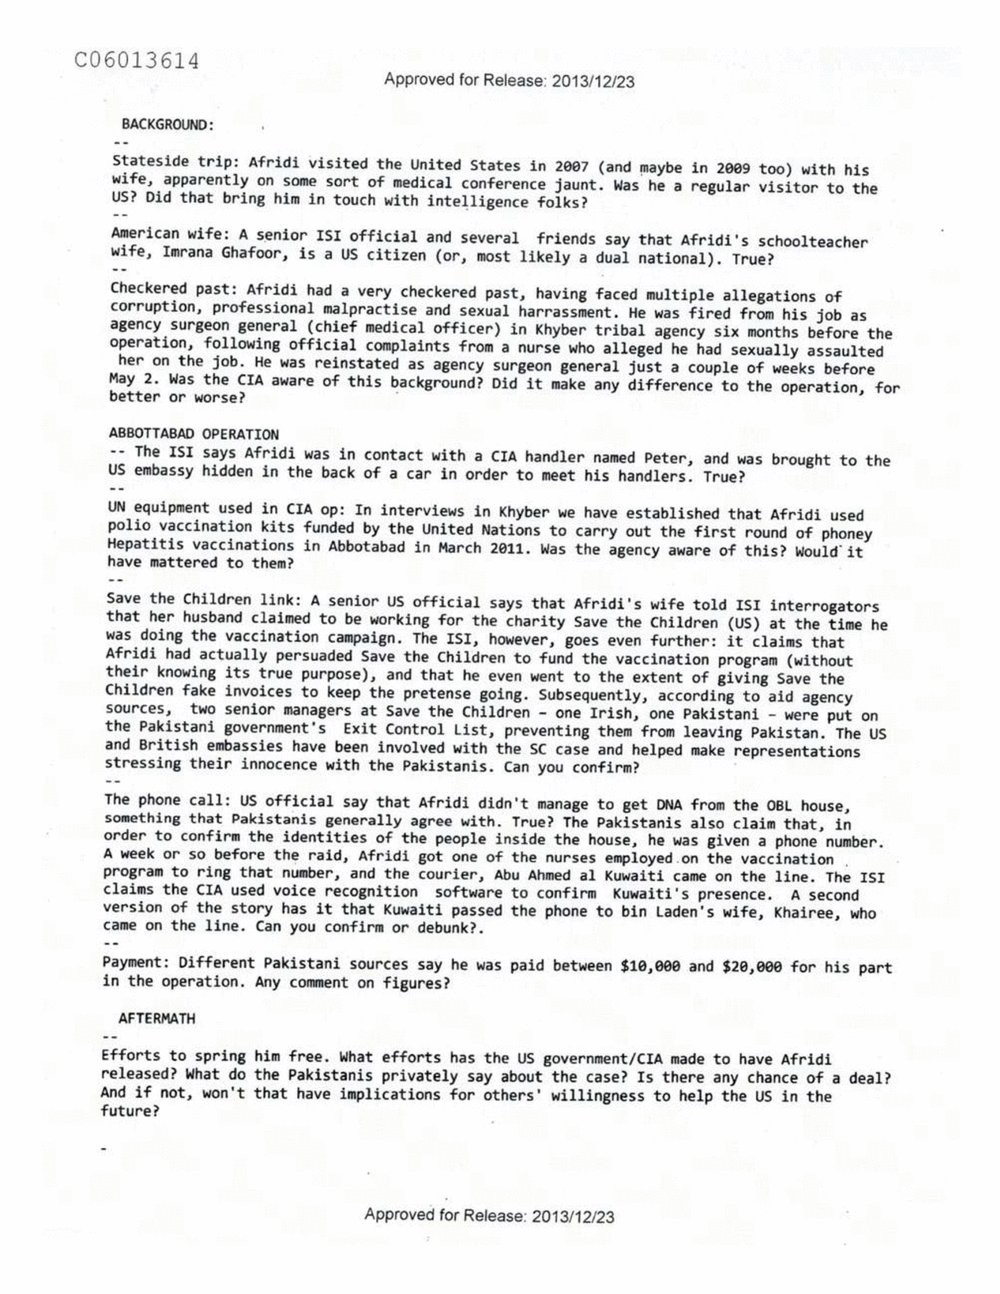 Page 435 from Email Correspondence Between Reporters and CIA Flacks